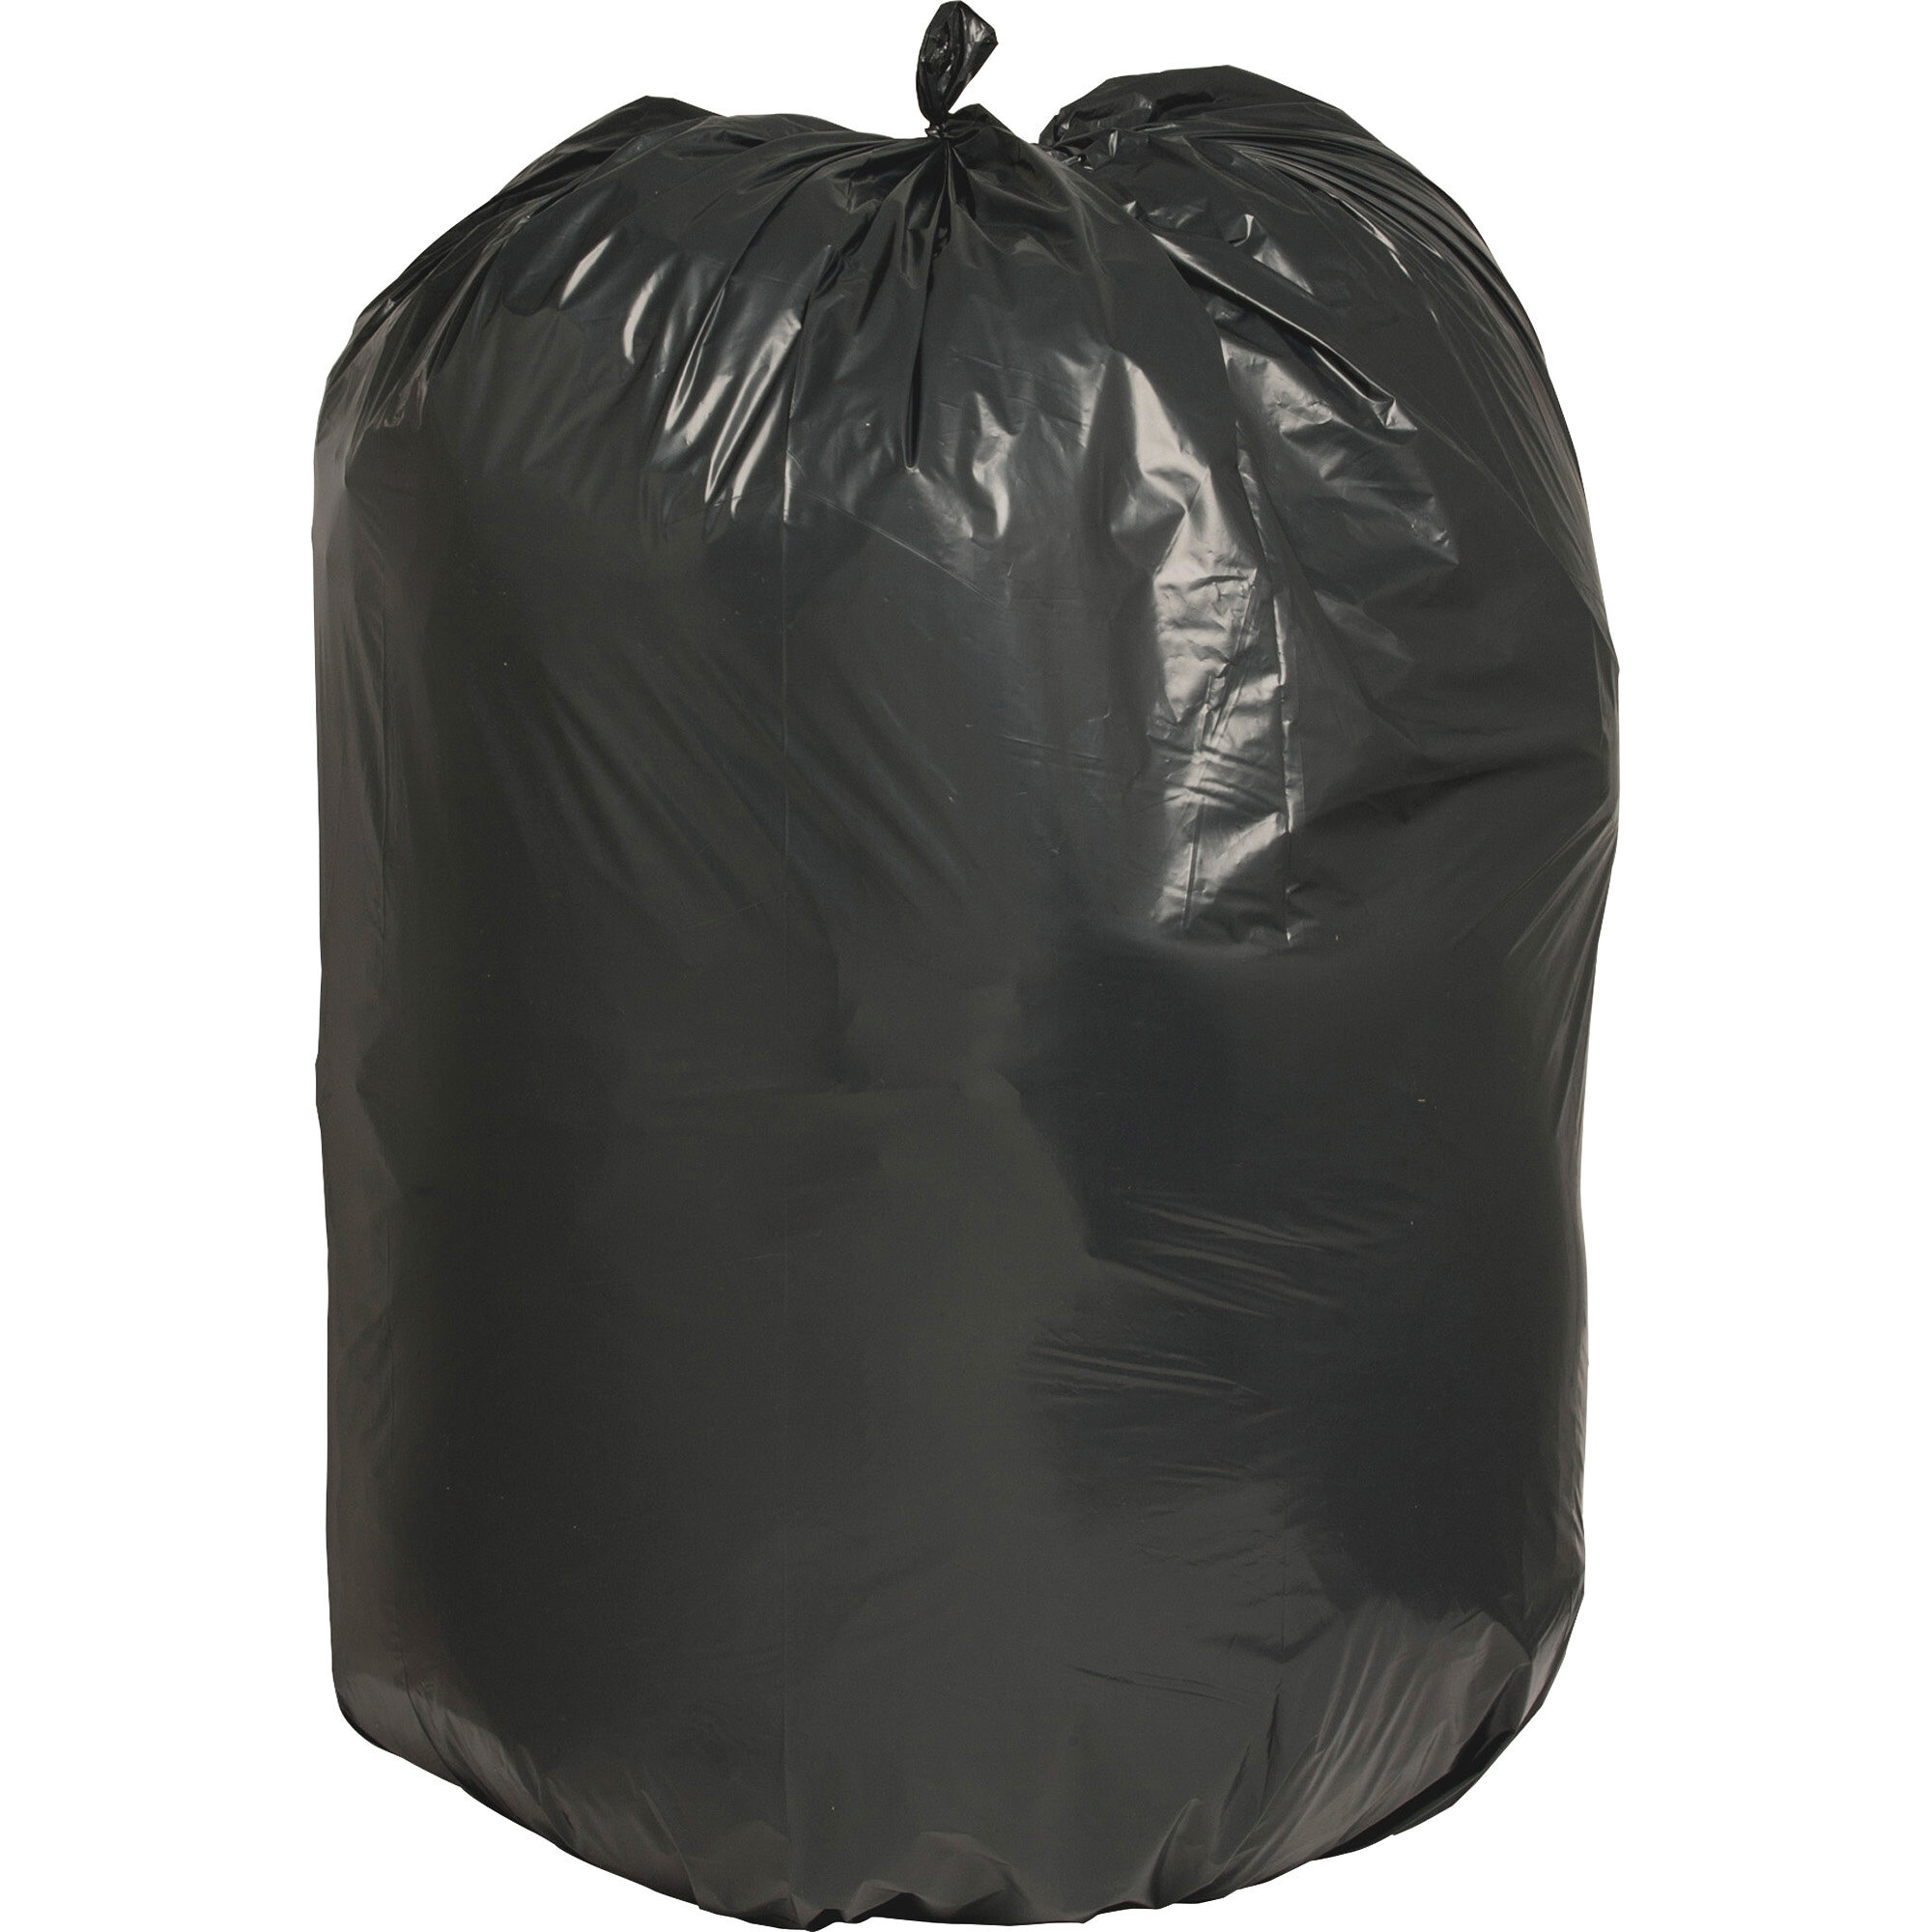 Nature Saver Trash Bags 33 Gallon 30percent Recycled Box Of 100